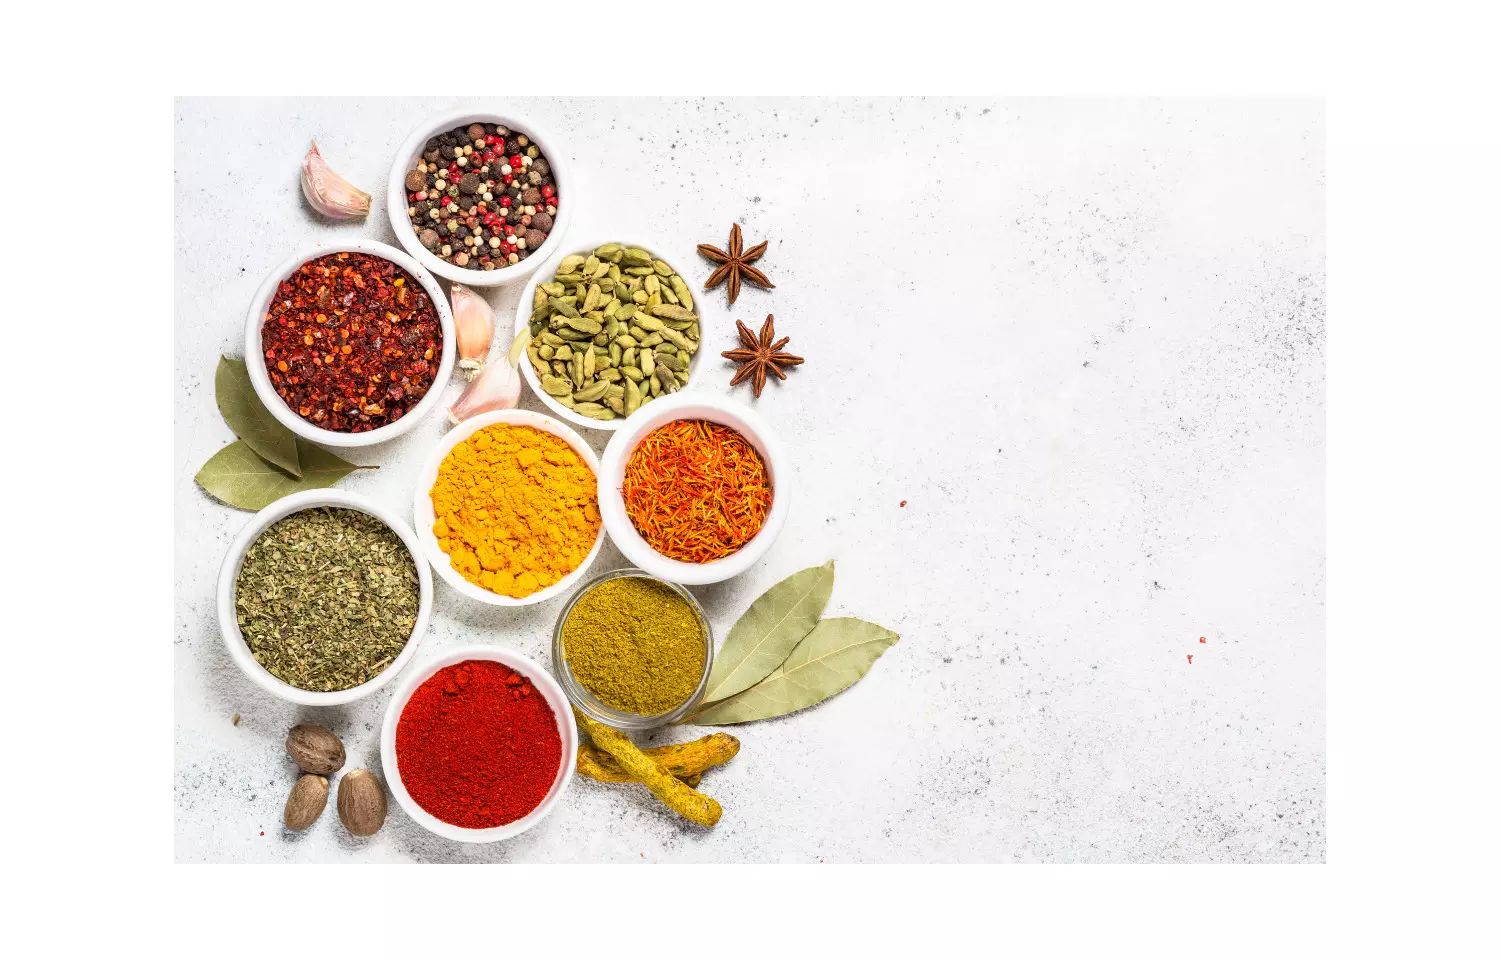 Adding high culinary dosage of herbs and spices to meals may help lower blood pressure